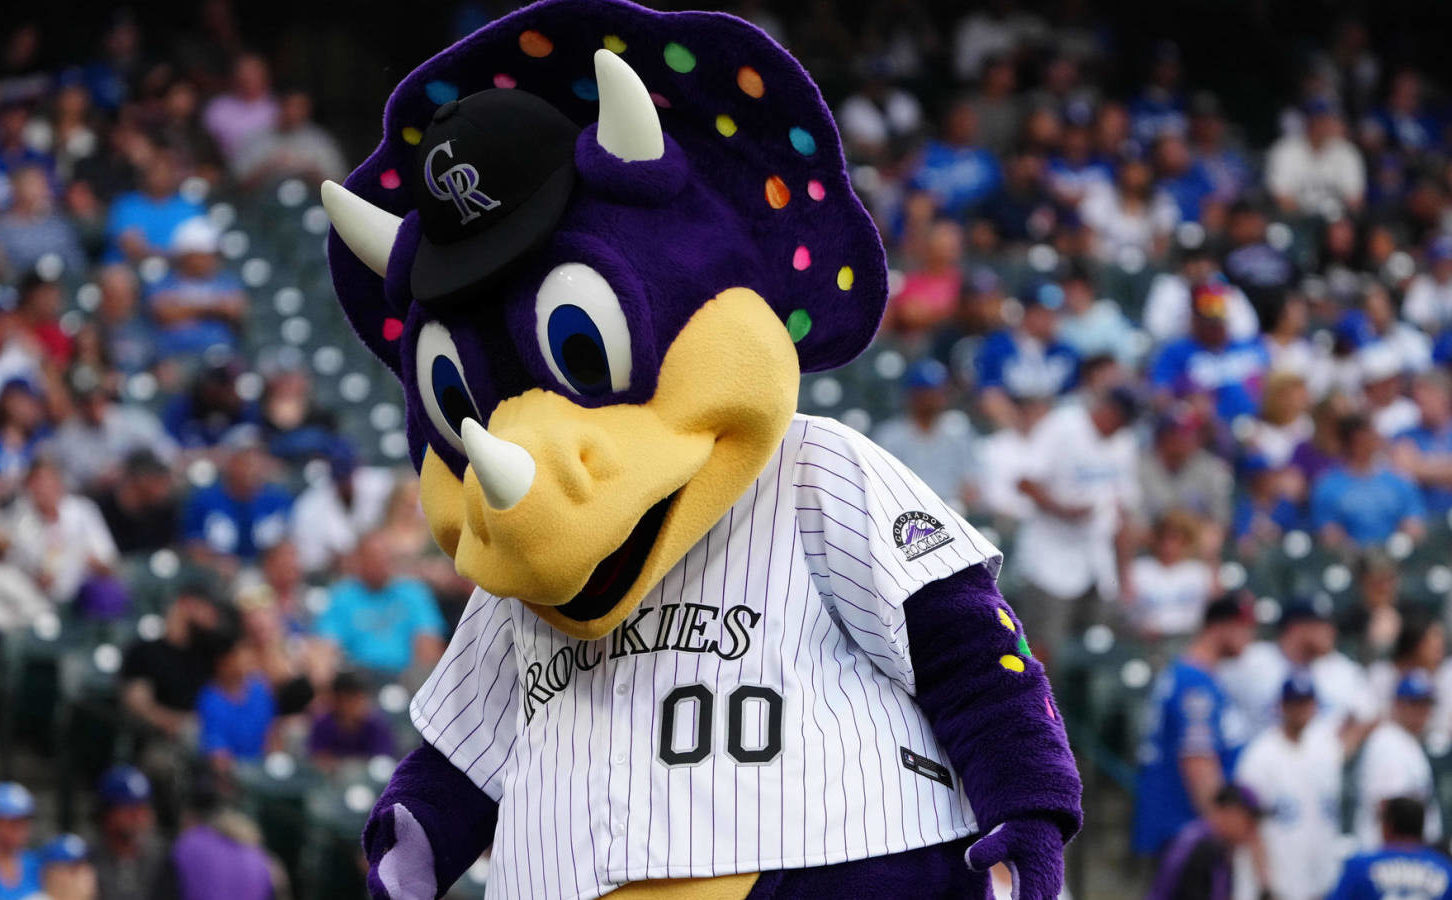 Rockies Say Fan Was Calling to Mascot, Not Shouting a Slur - The